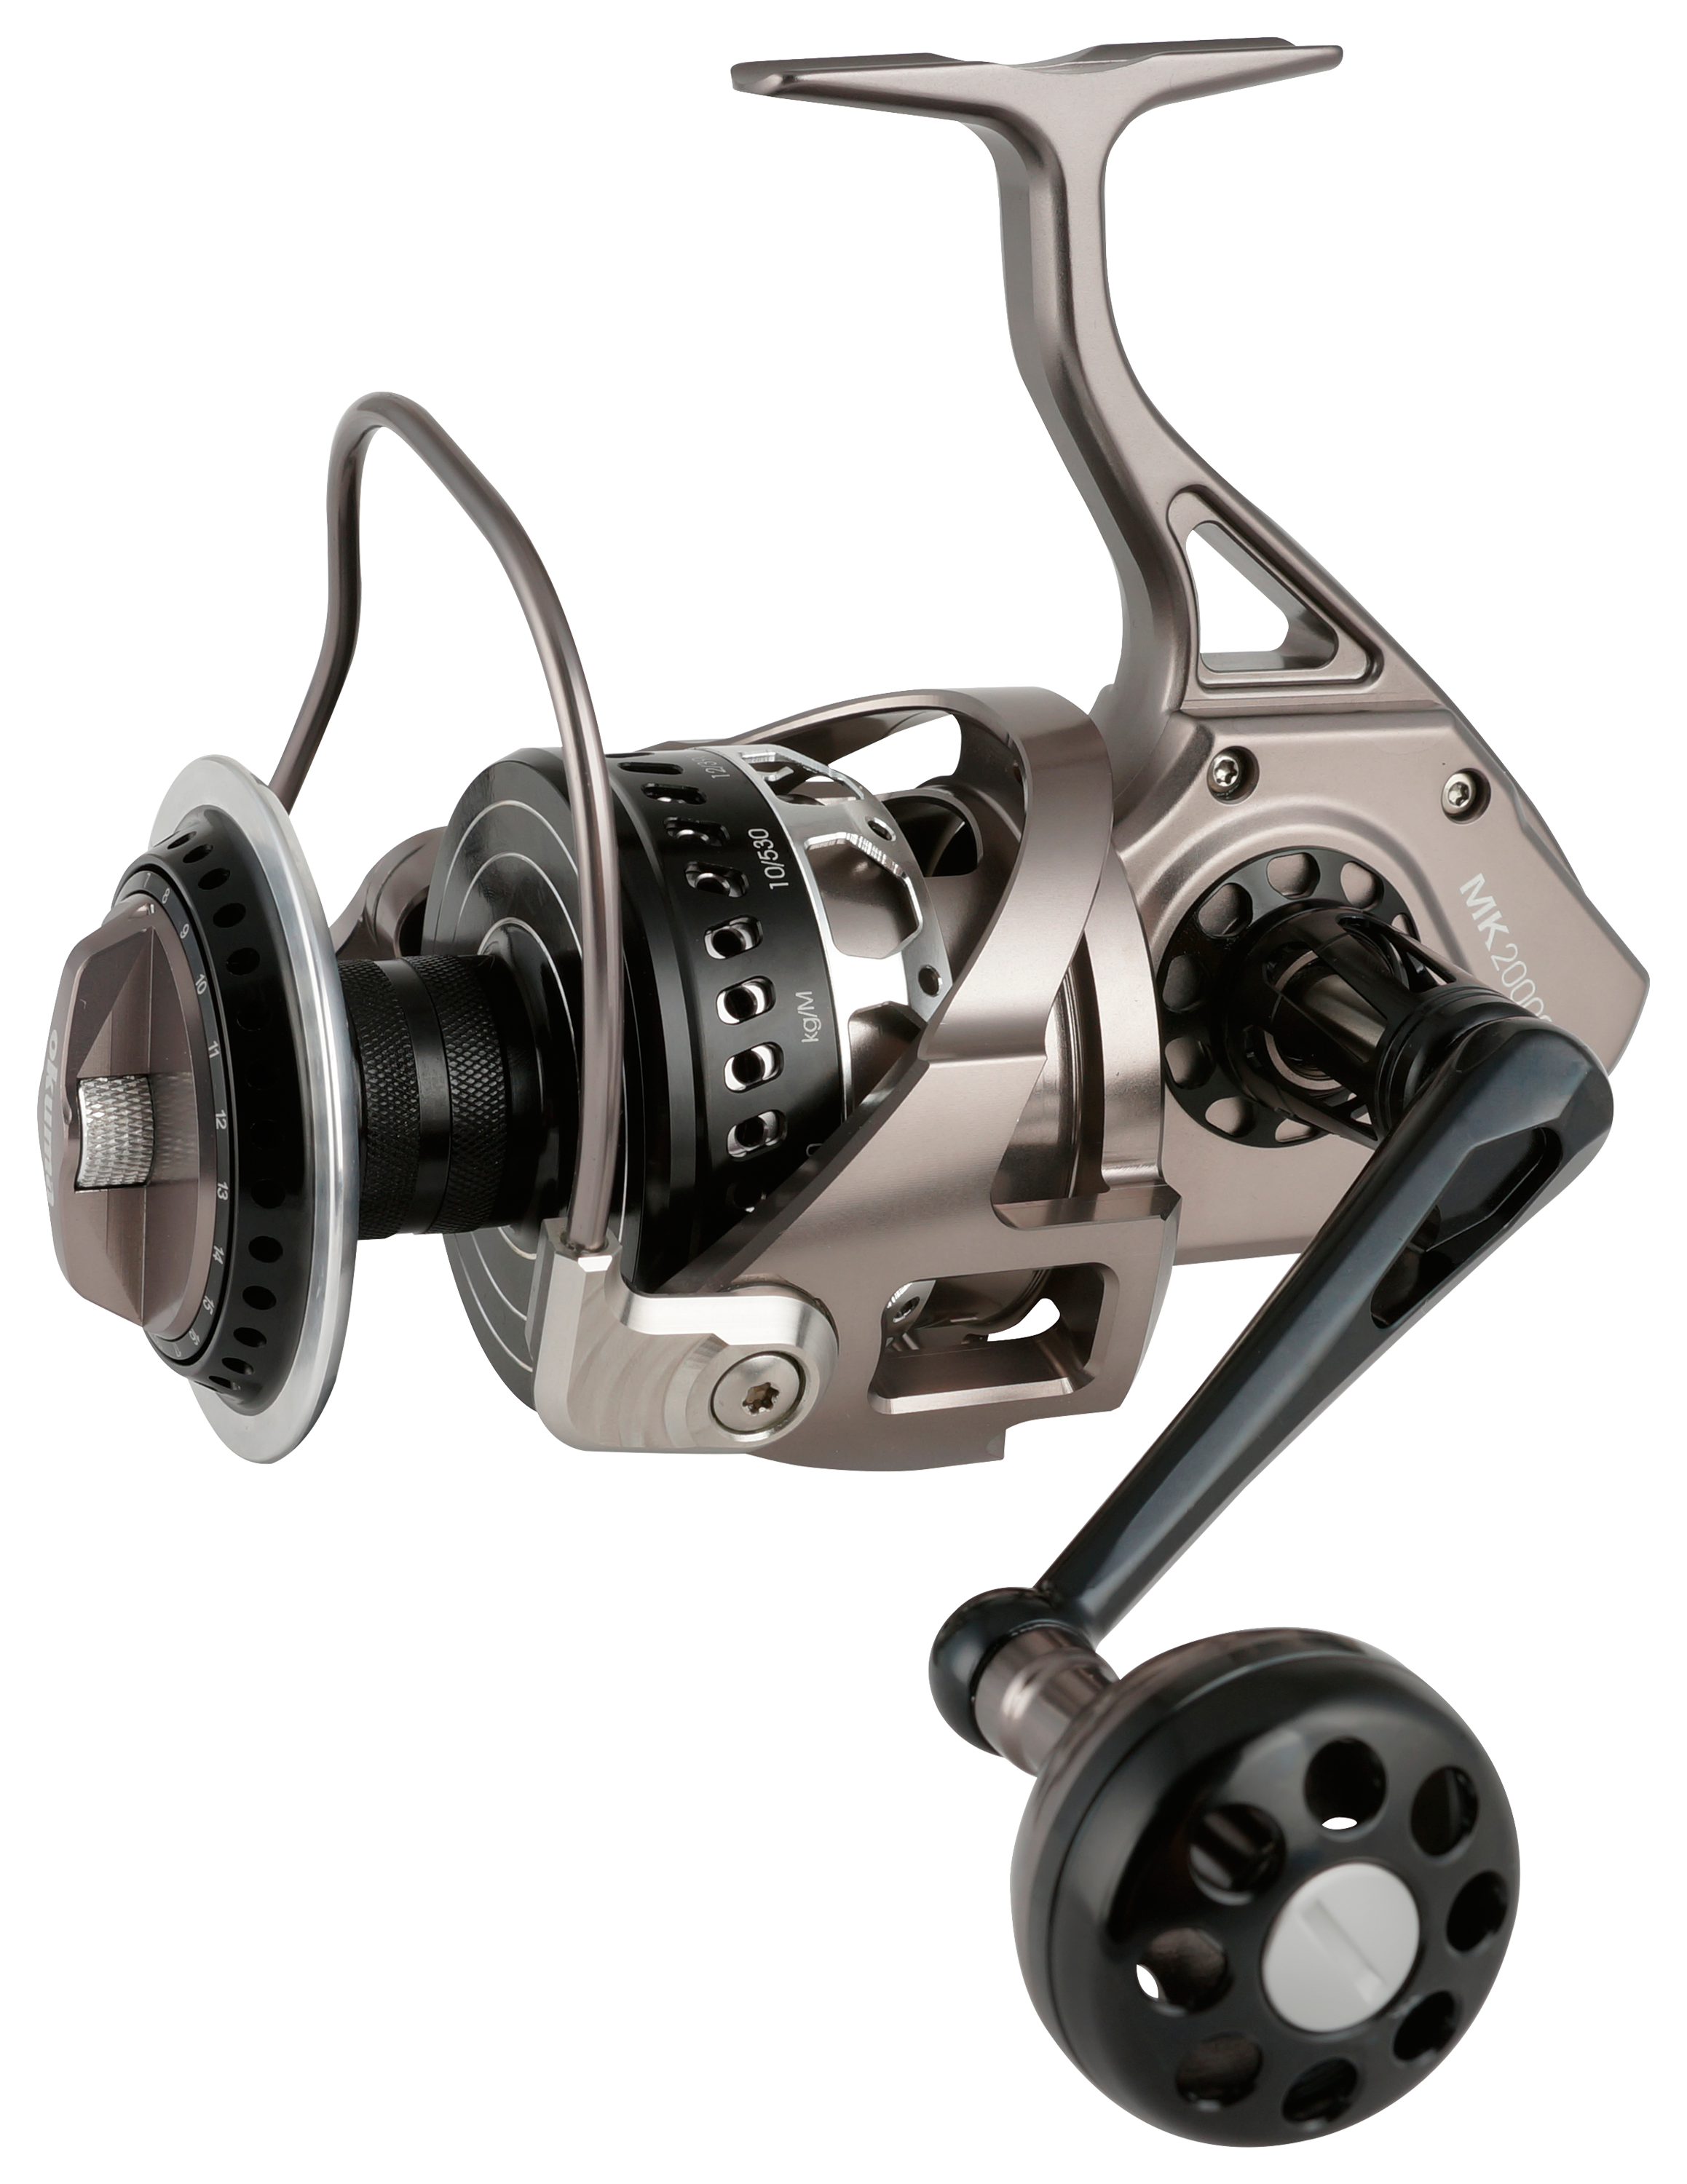 The Makaira spinning reel continues this evolution of big game